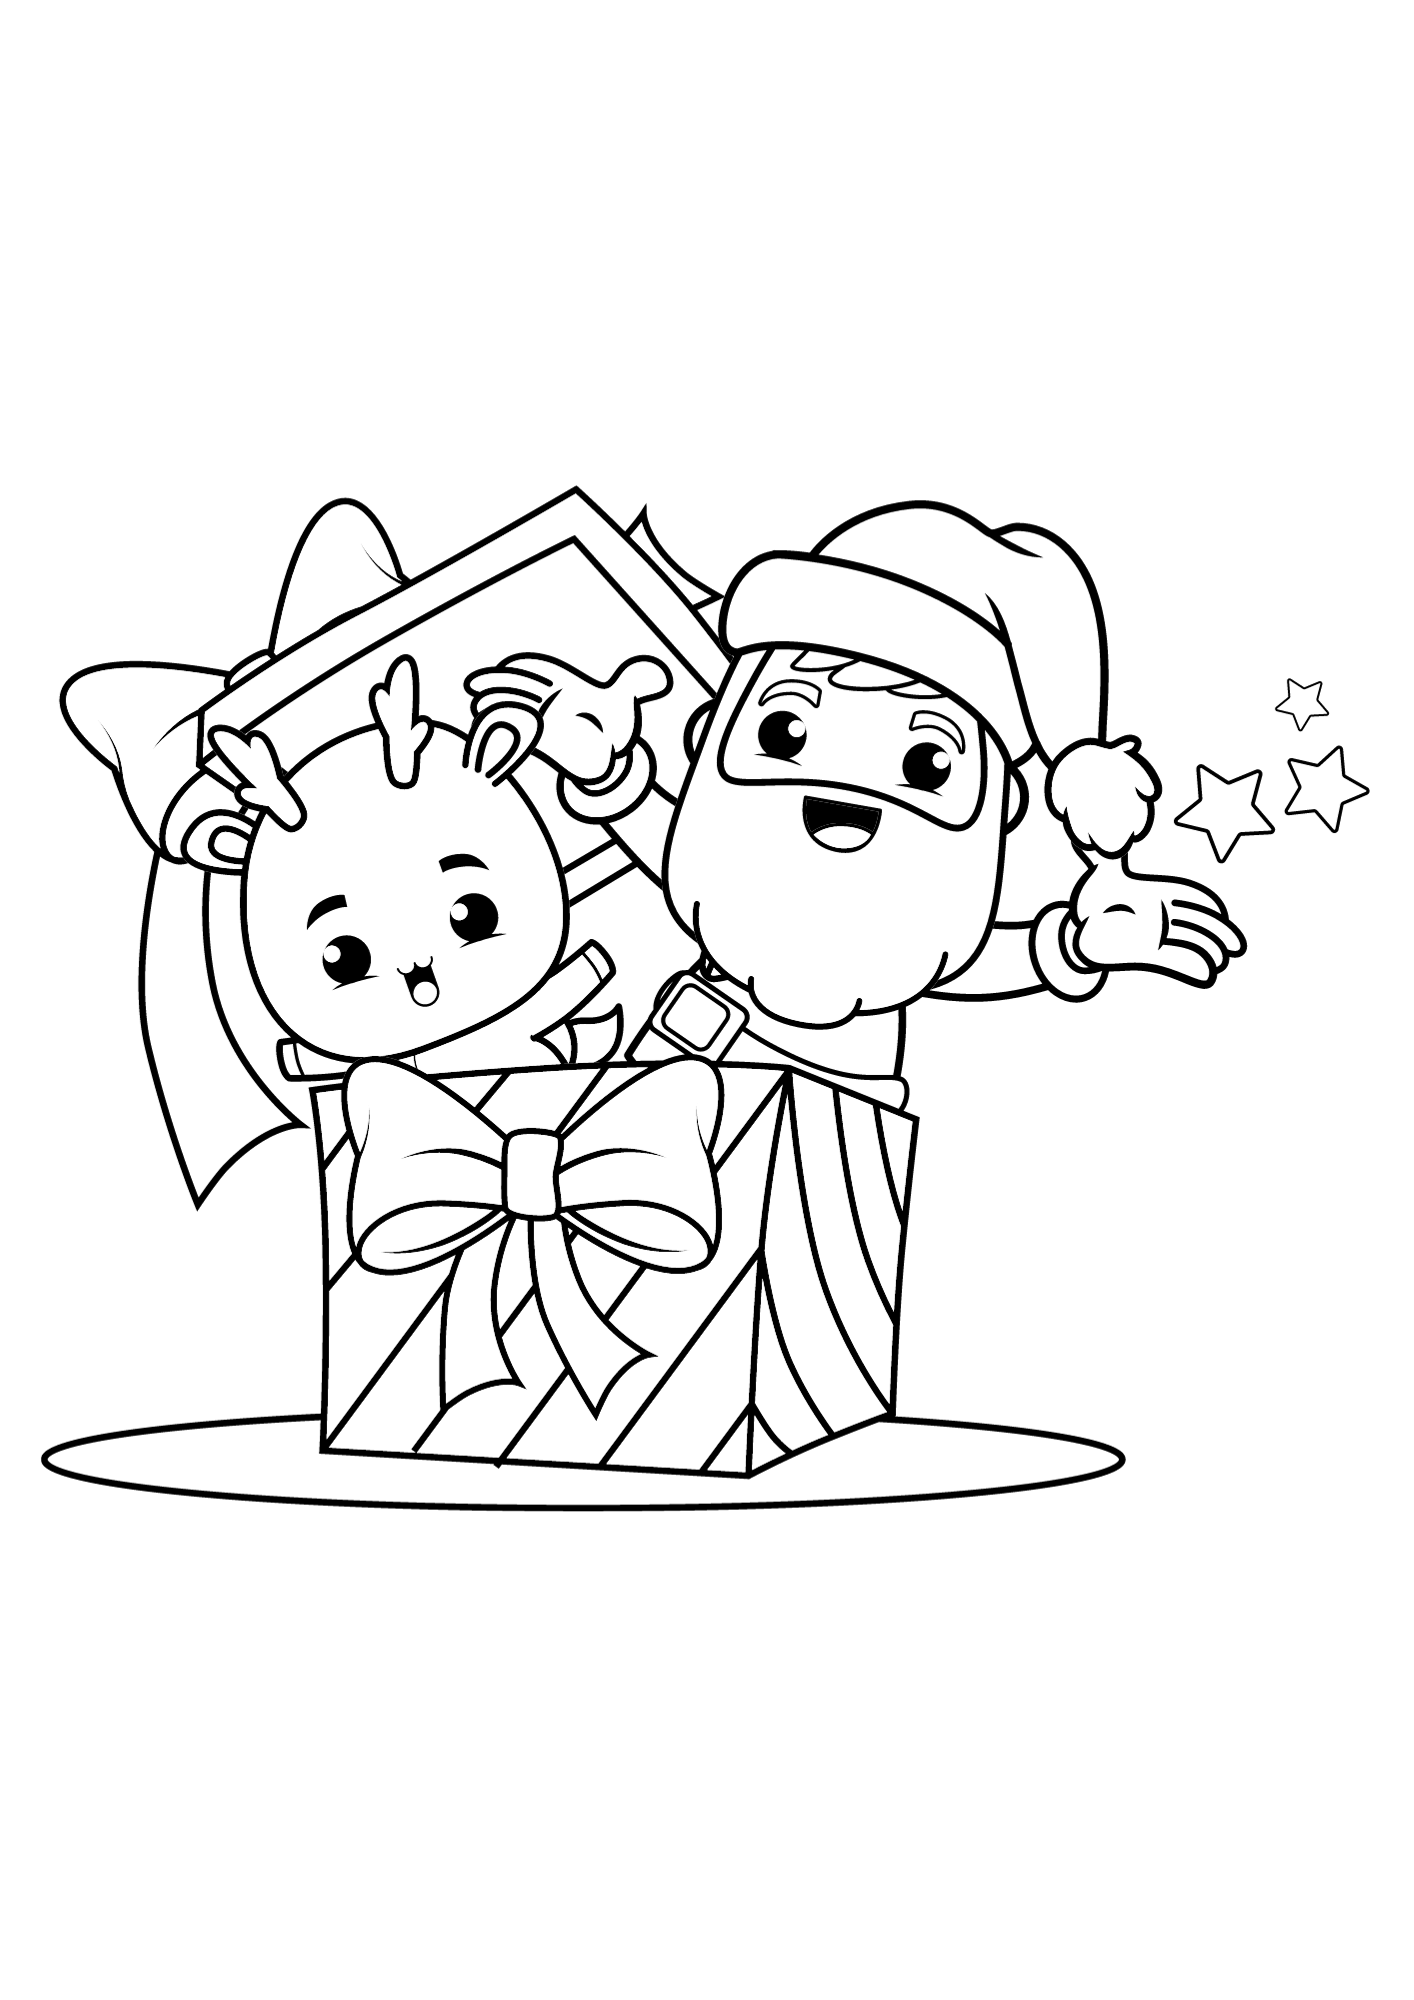 Sweet Santa Claus Coloring pages